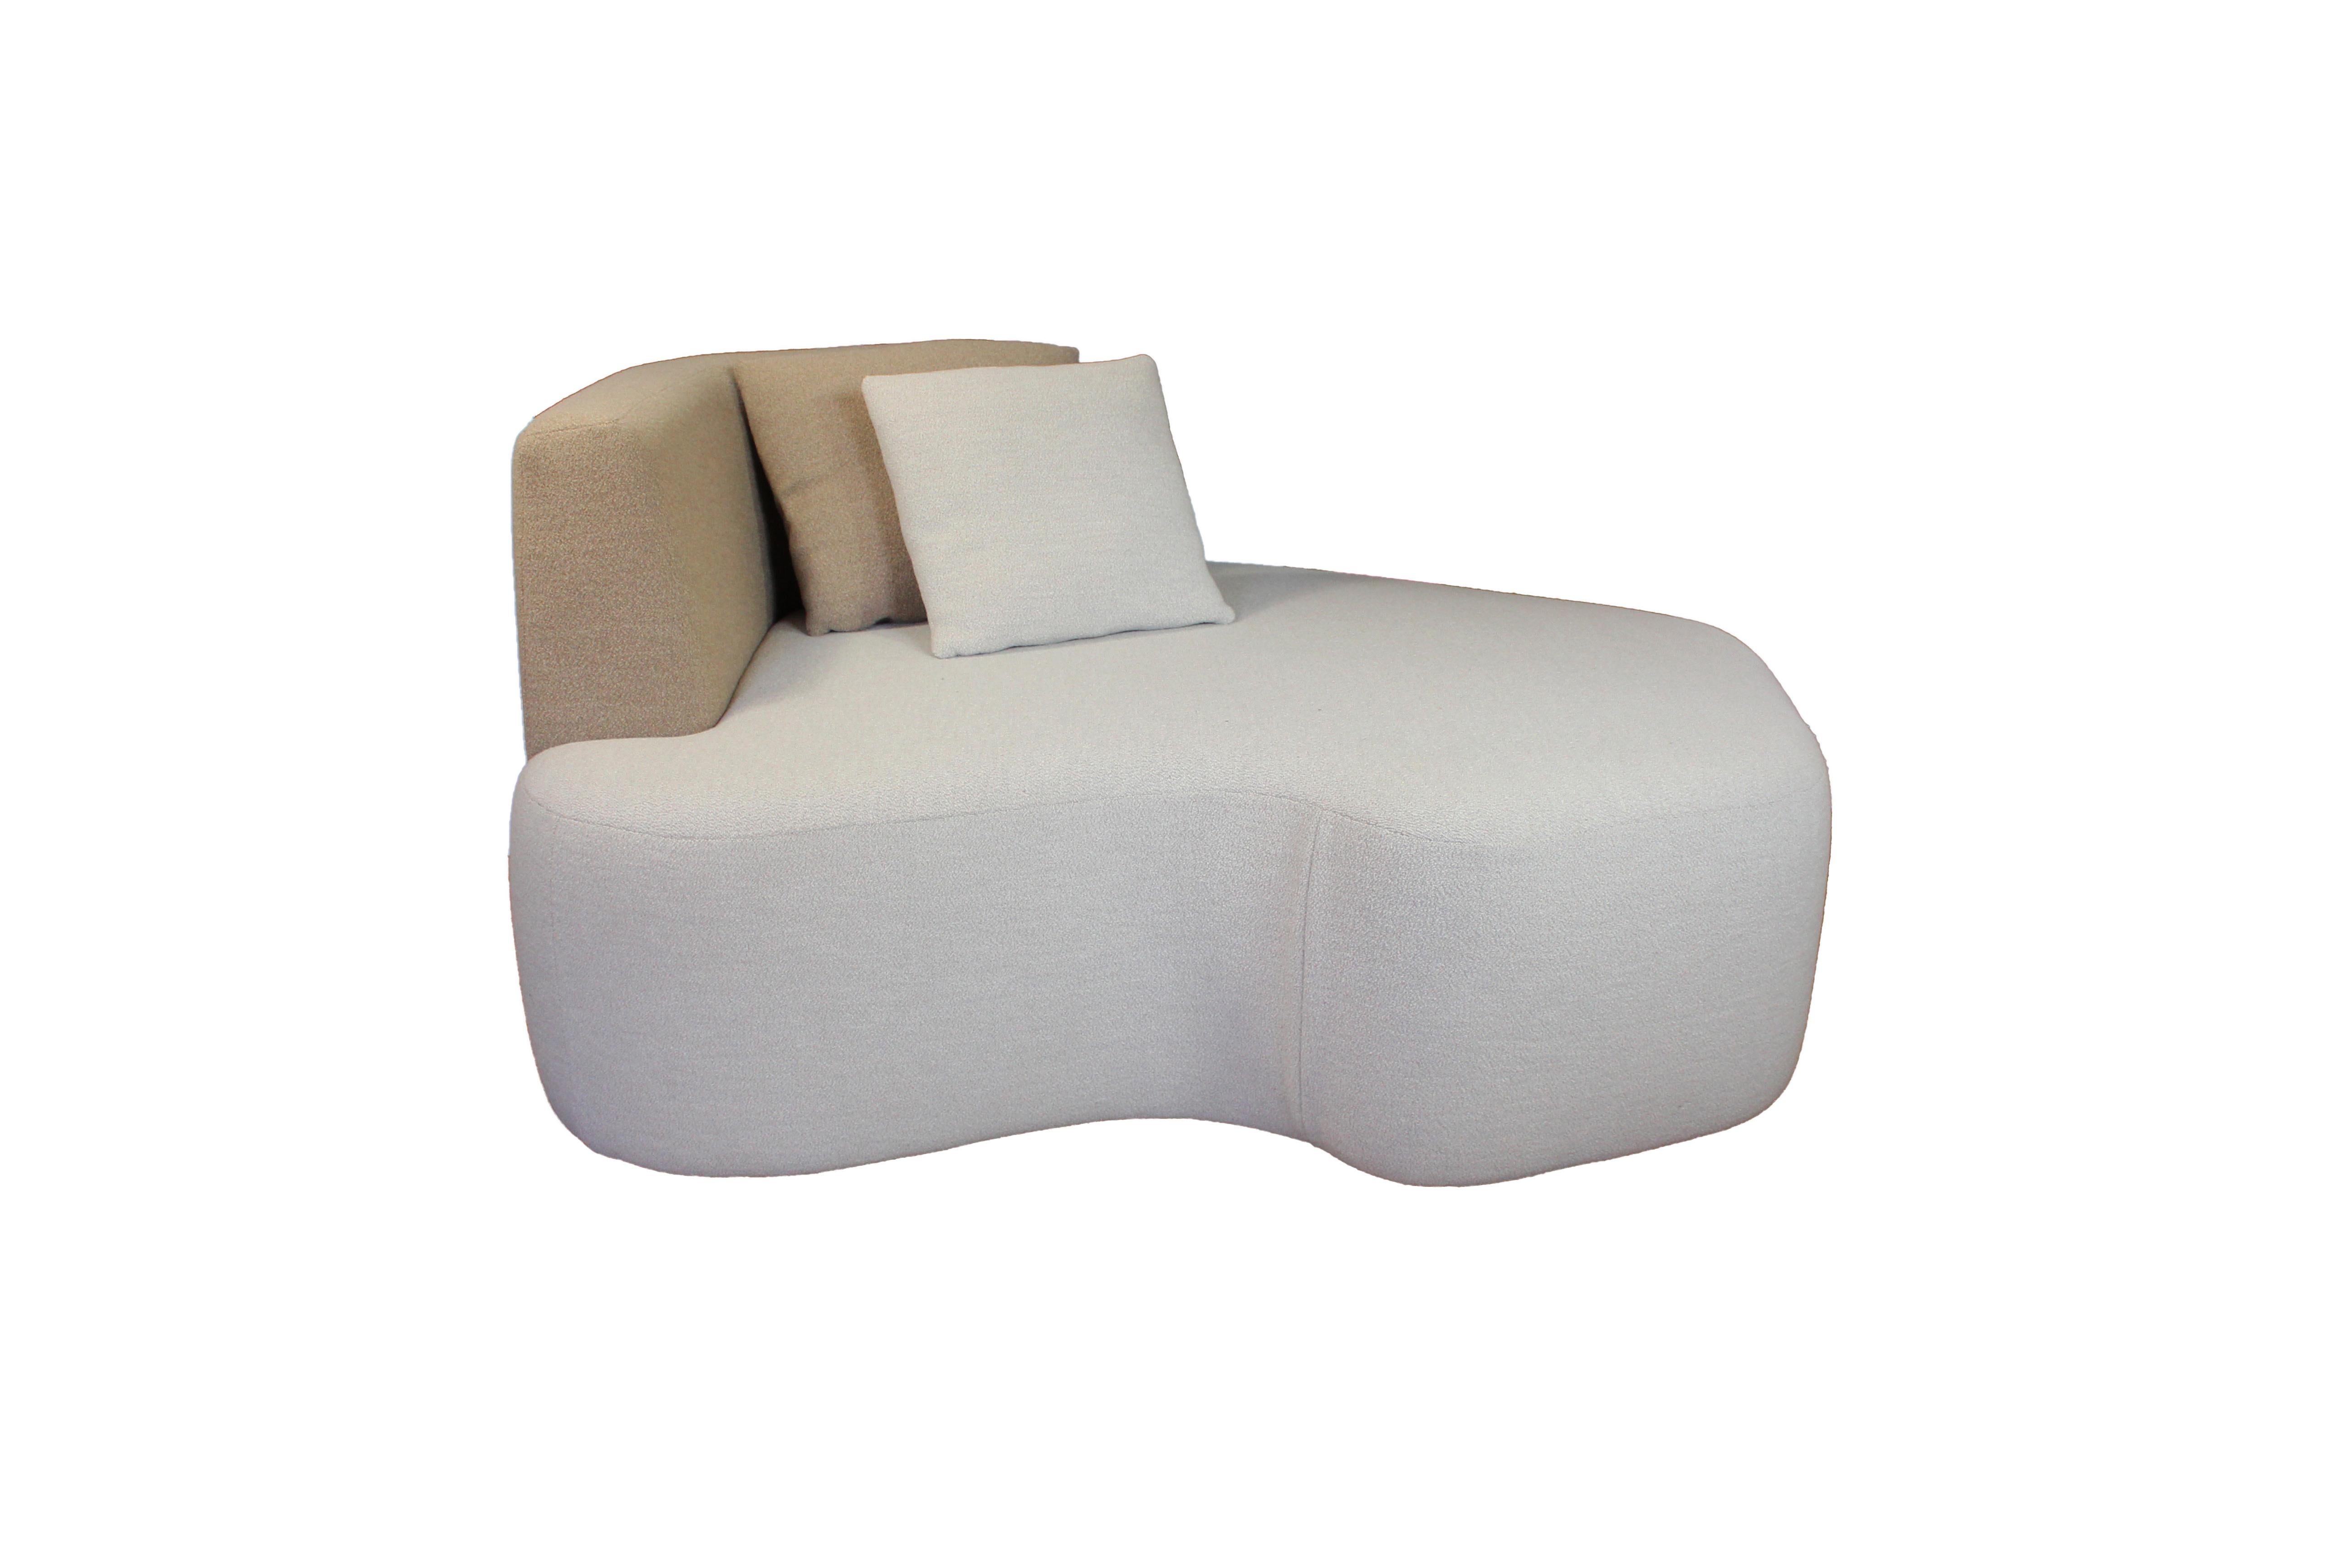 Modern Sofa Pierre in Cream and Brown Wool Design Eric Gizard Made in France For Sale